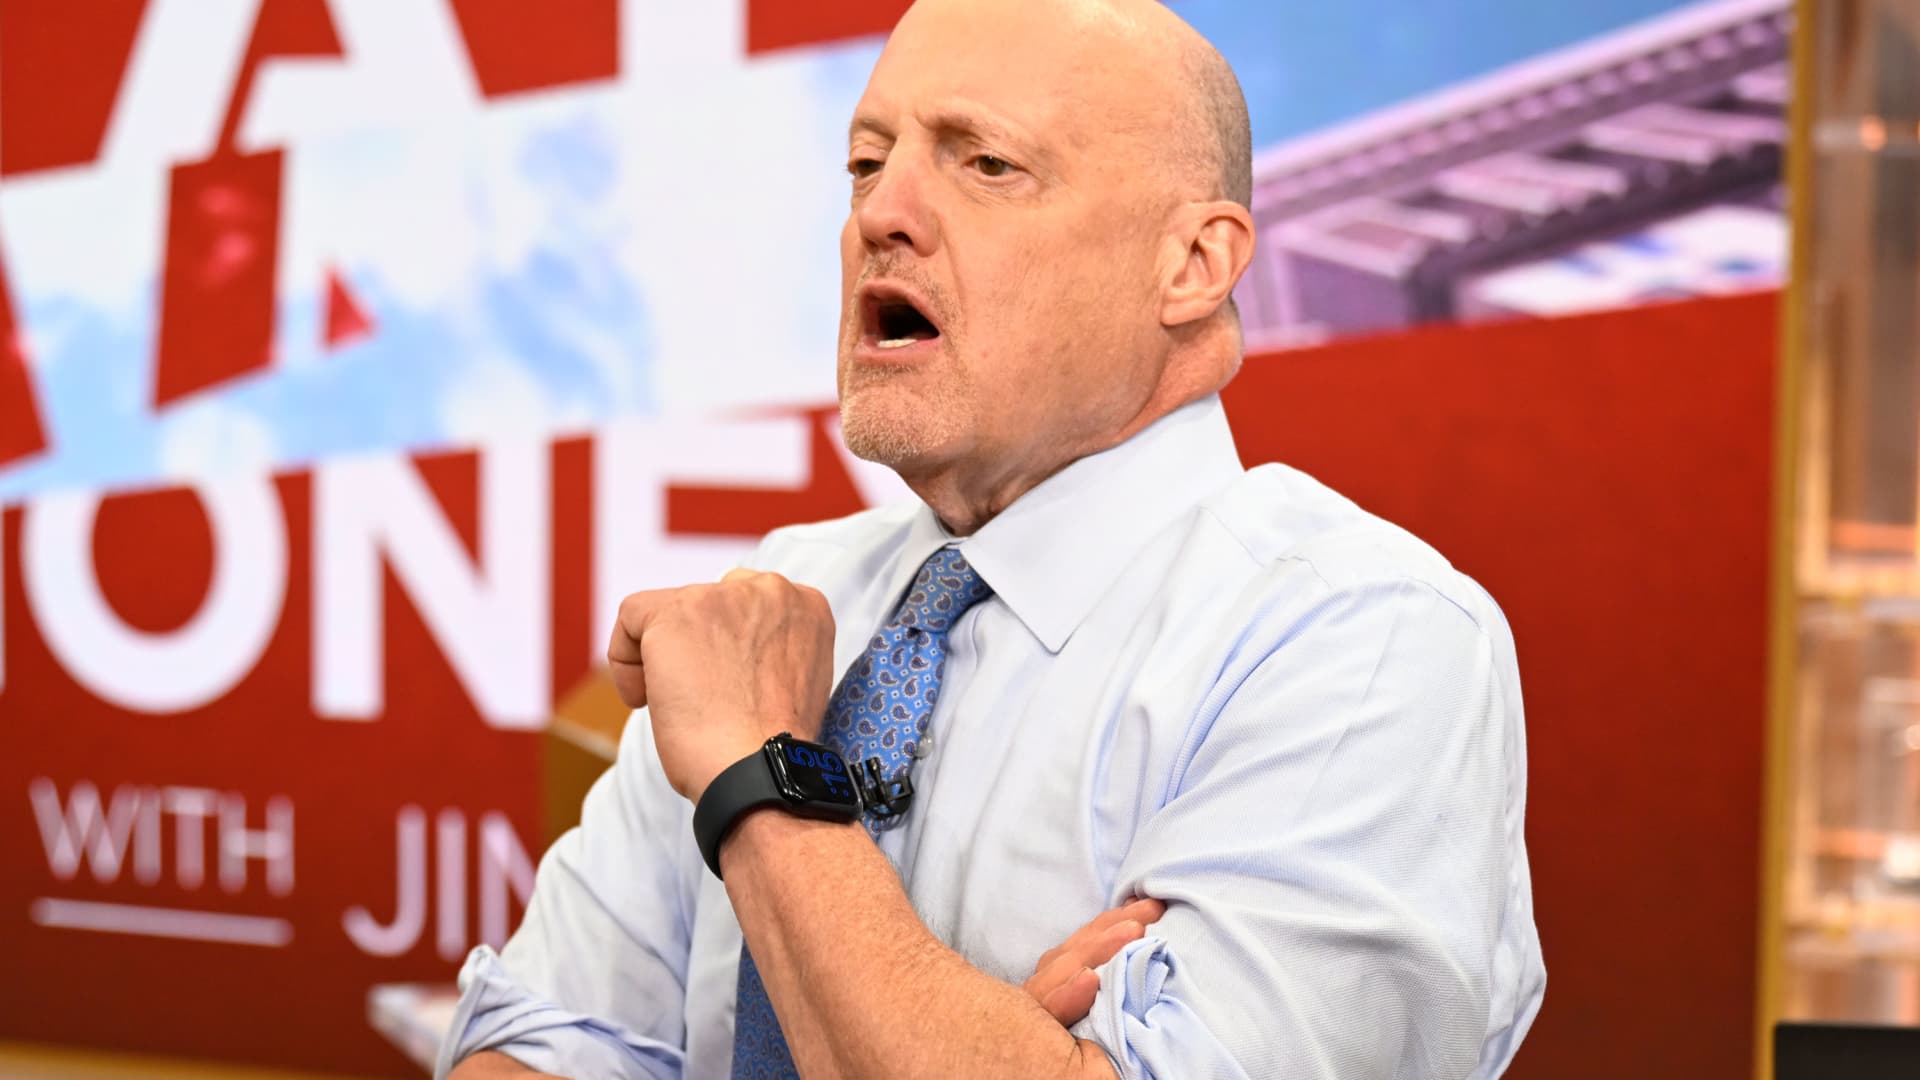 Wait for a price break next week while the market’s overbought, Jim Cramer says